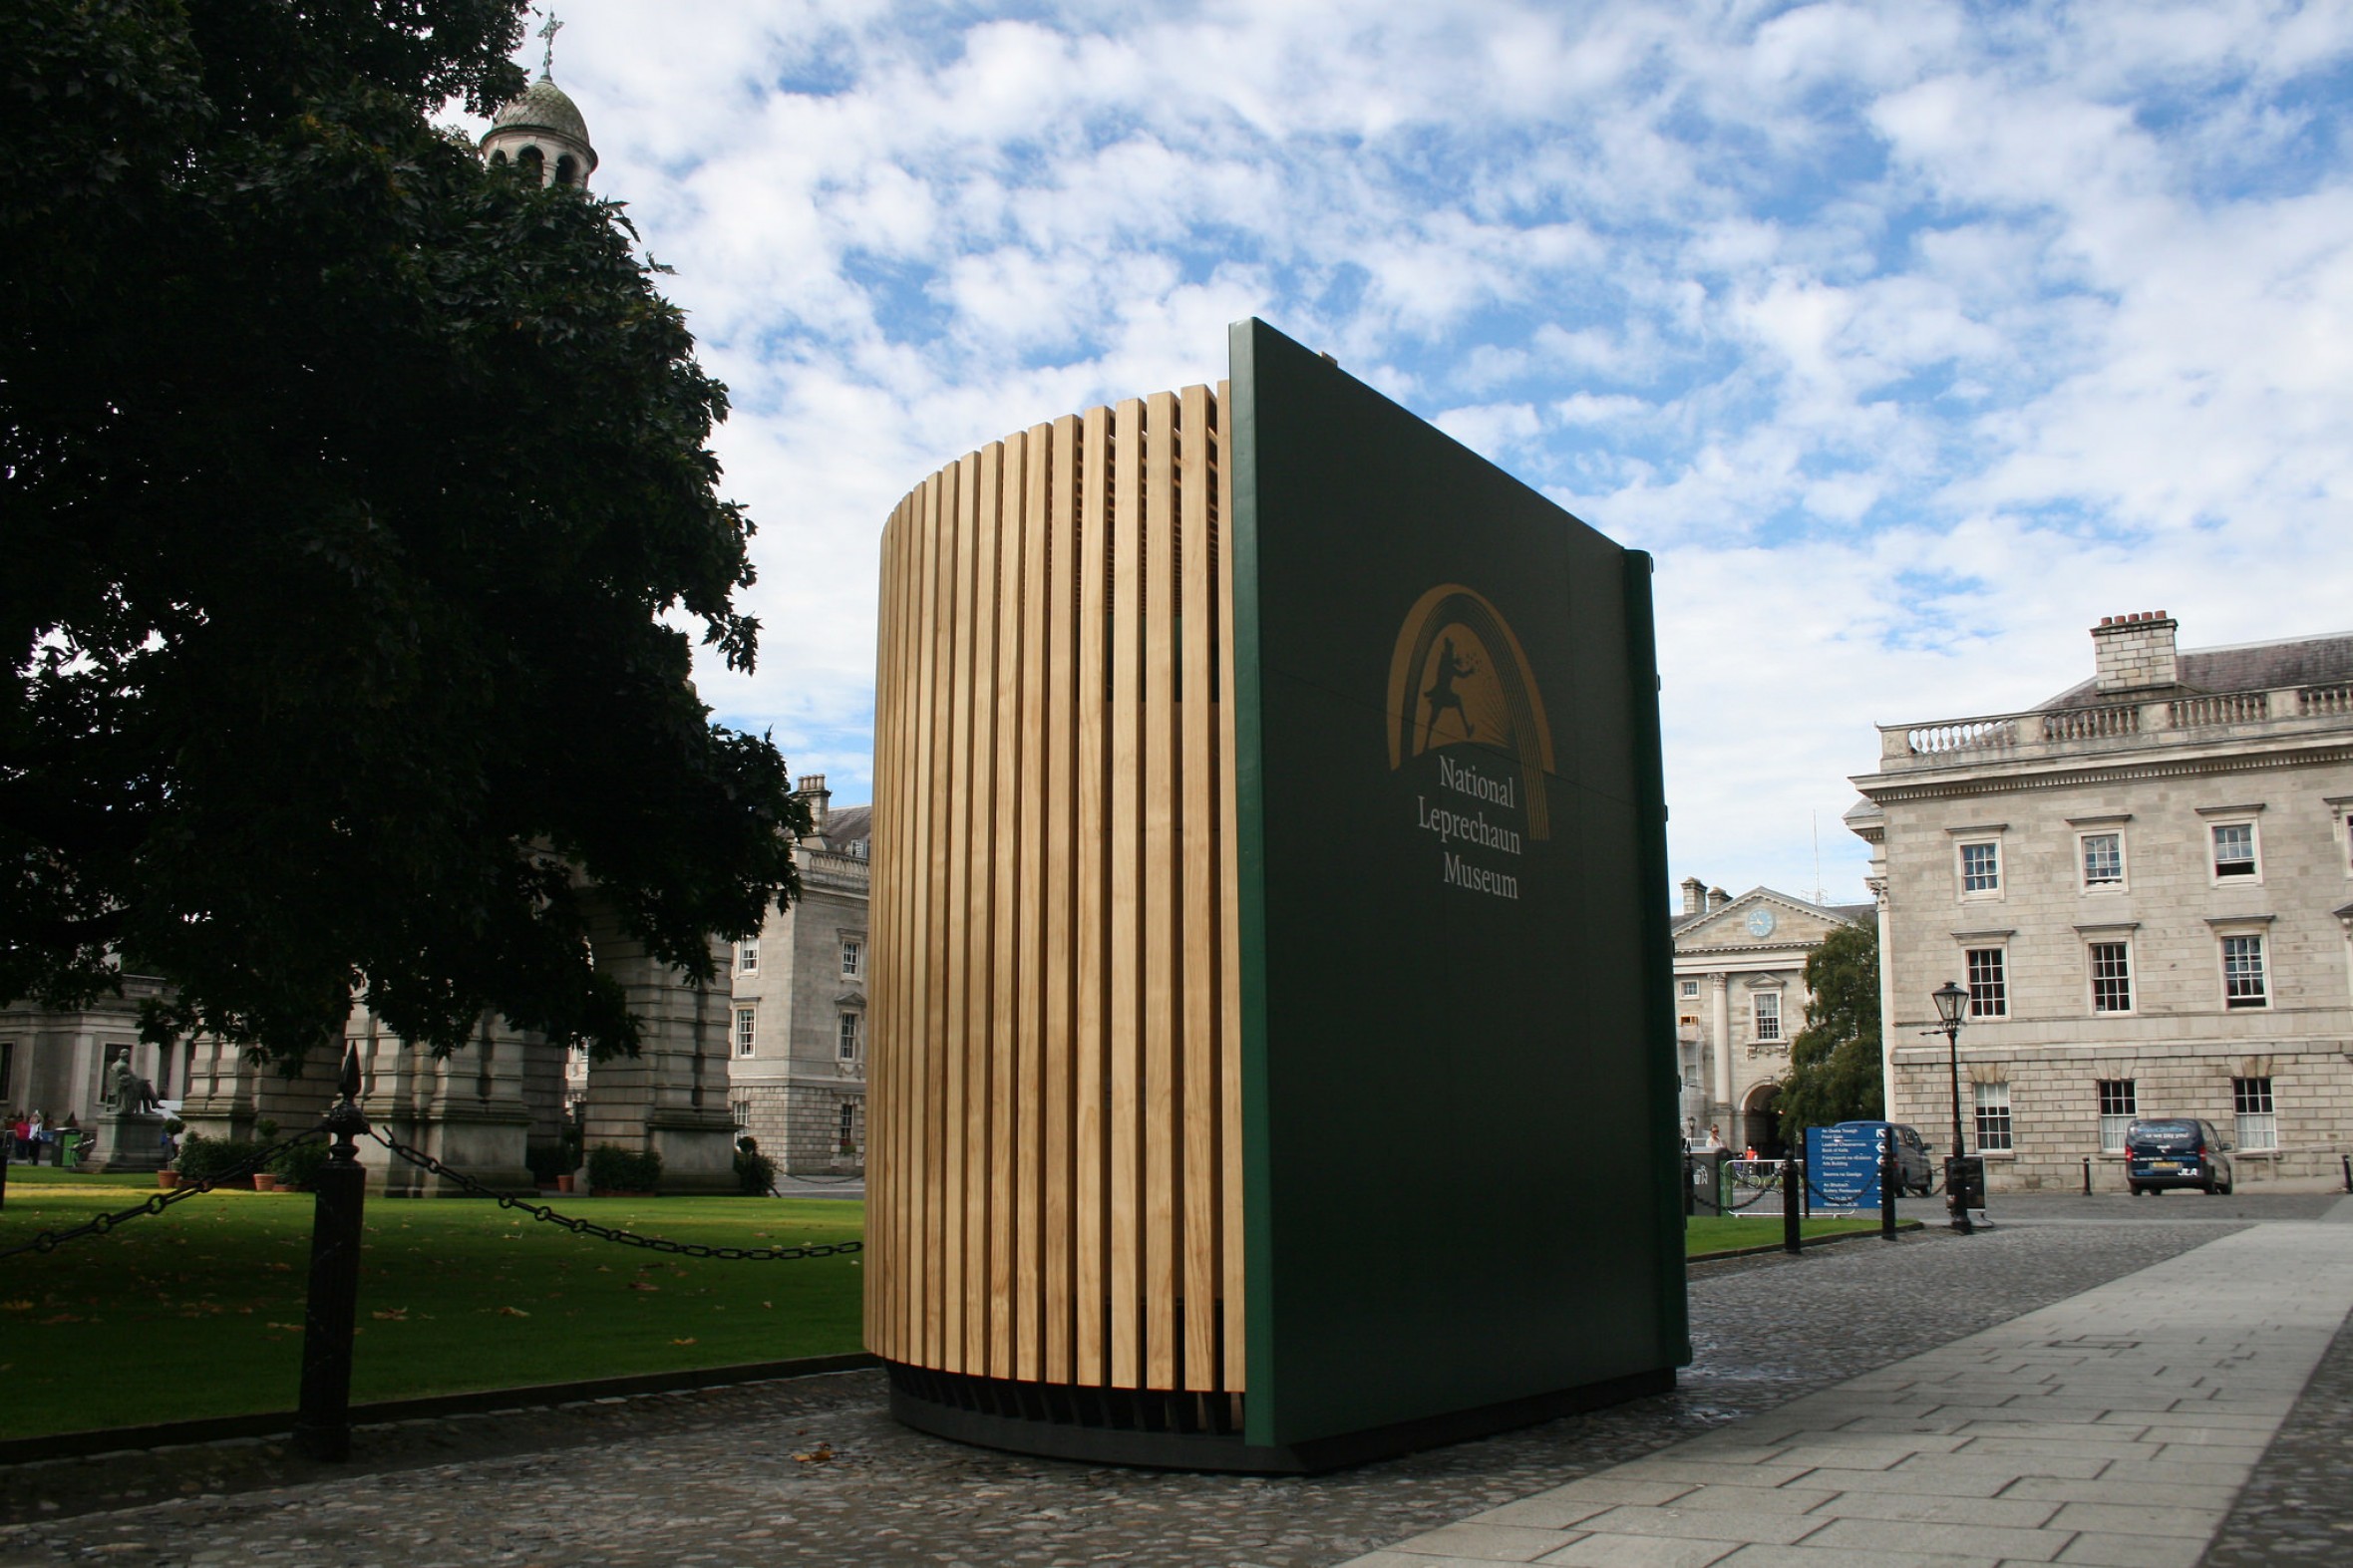 TRICOYA - The Big Book by the National Leprechaun Museum in Ireland